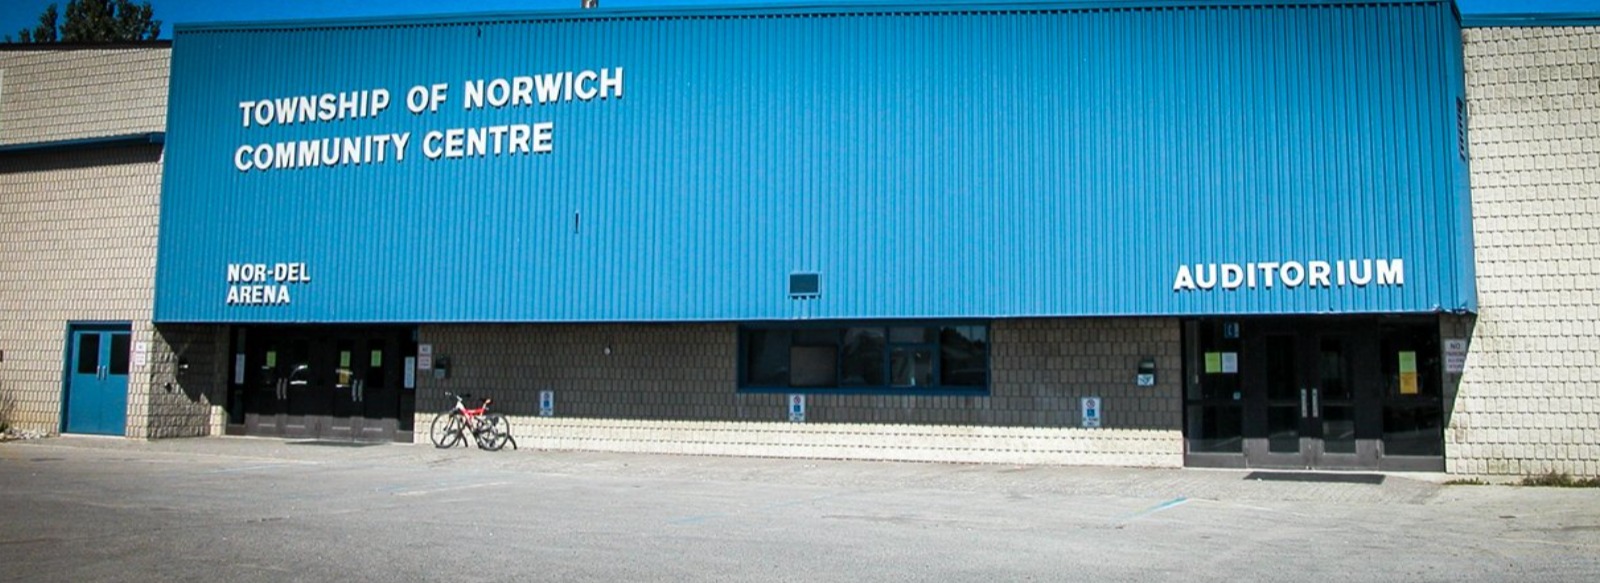 arena in Norwich